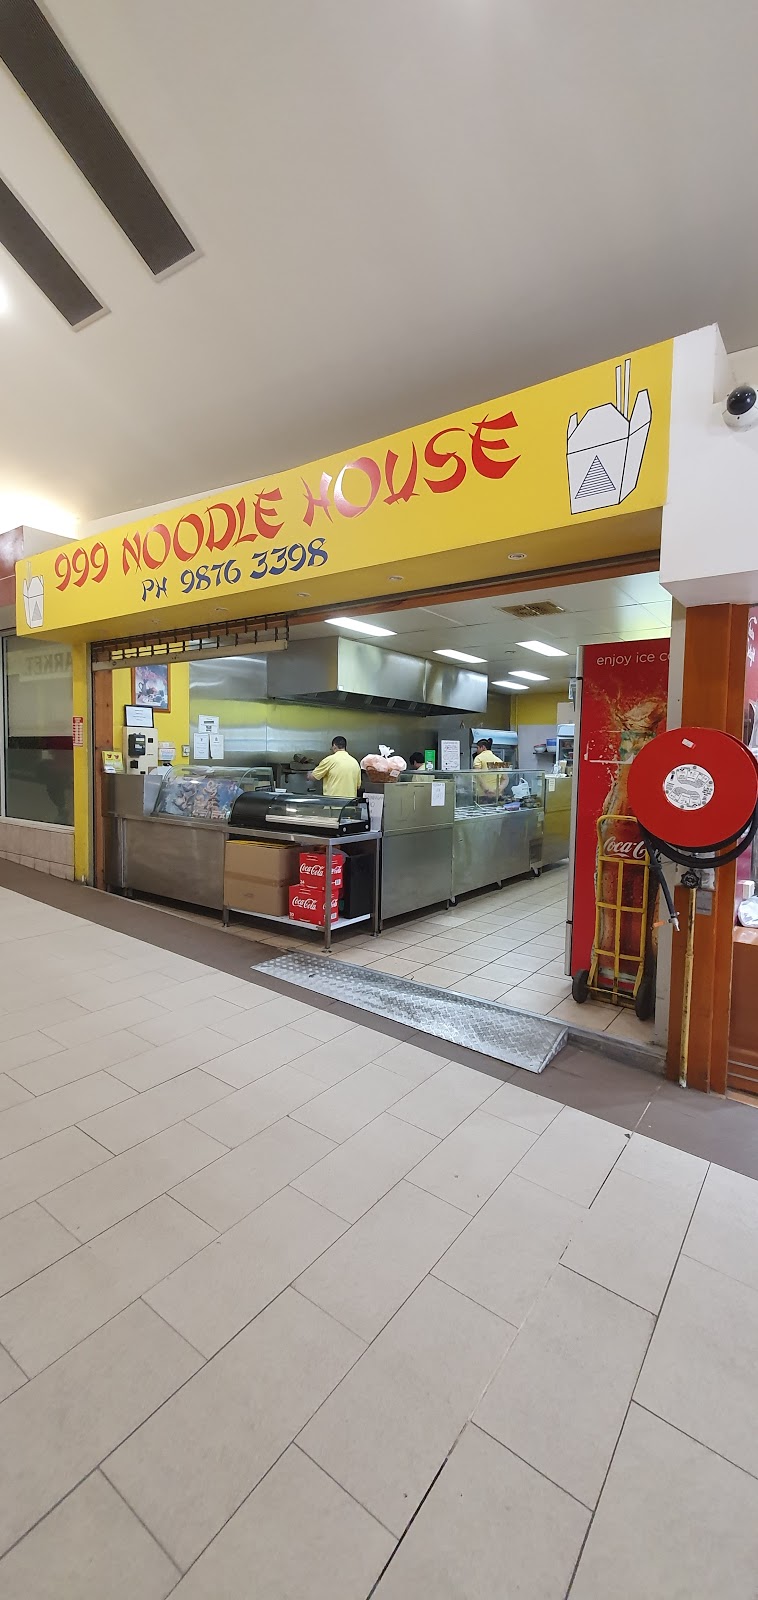 999 Noodle House | meal takeaway | 204-206 Warrandyte Rd, Ringwood North VIC 3134, Australia | 0398763398 OR +61 3 9876 3398